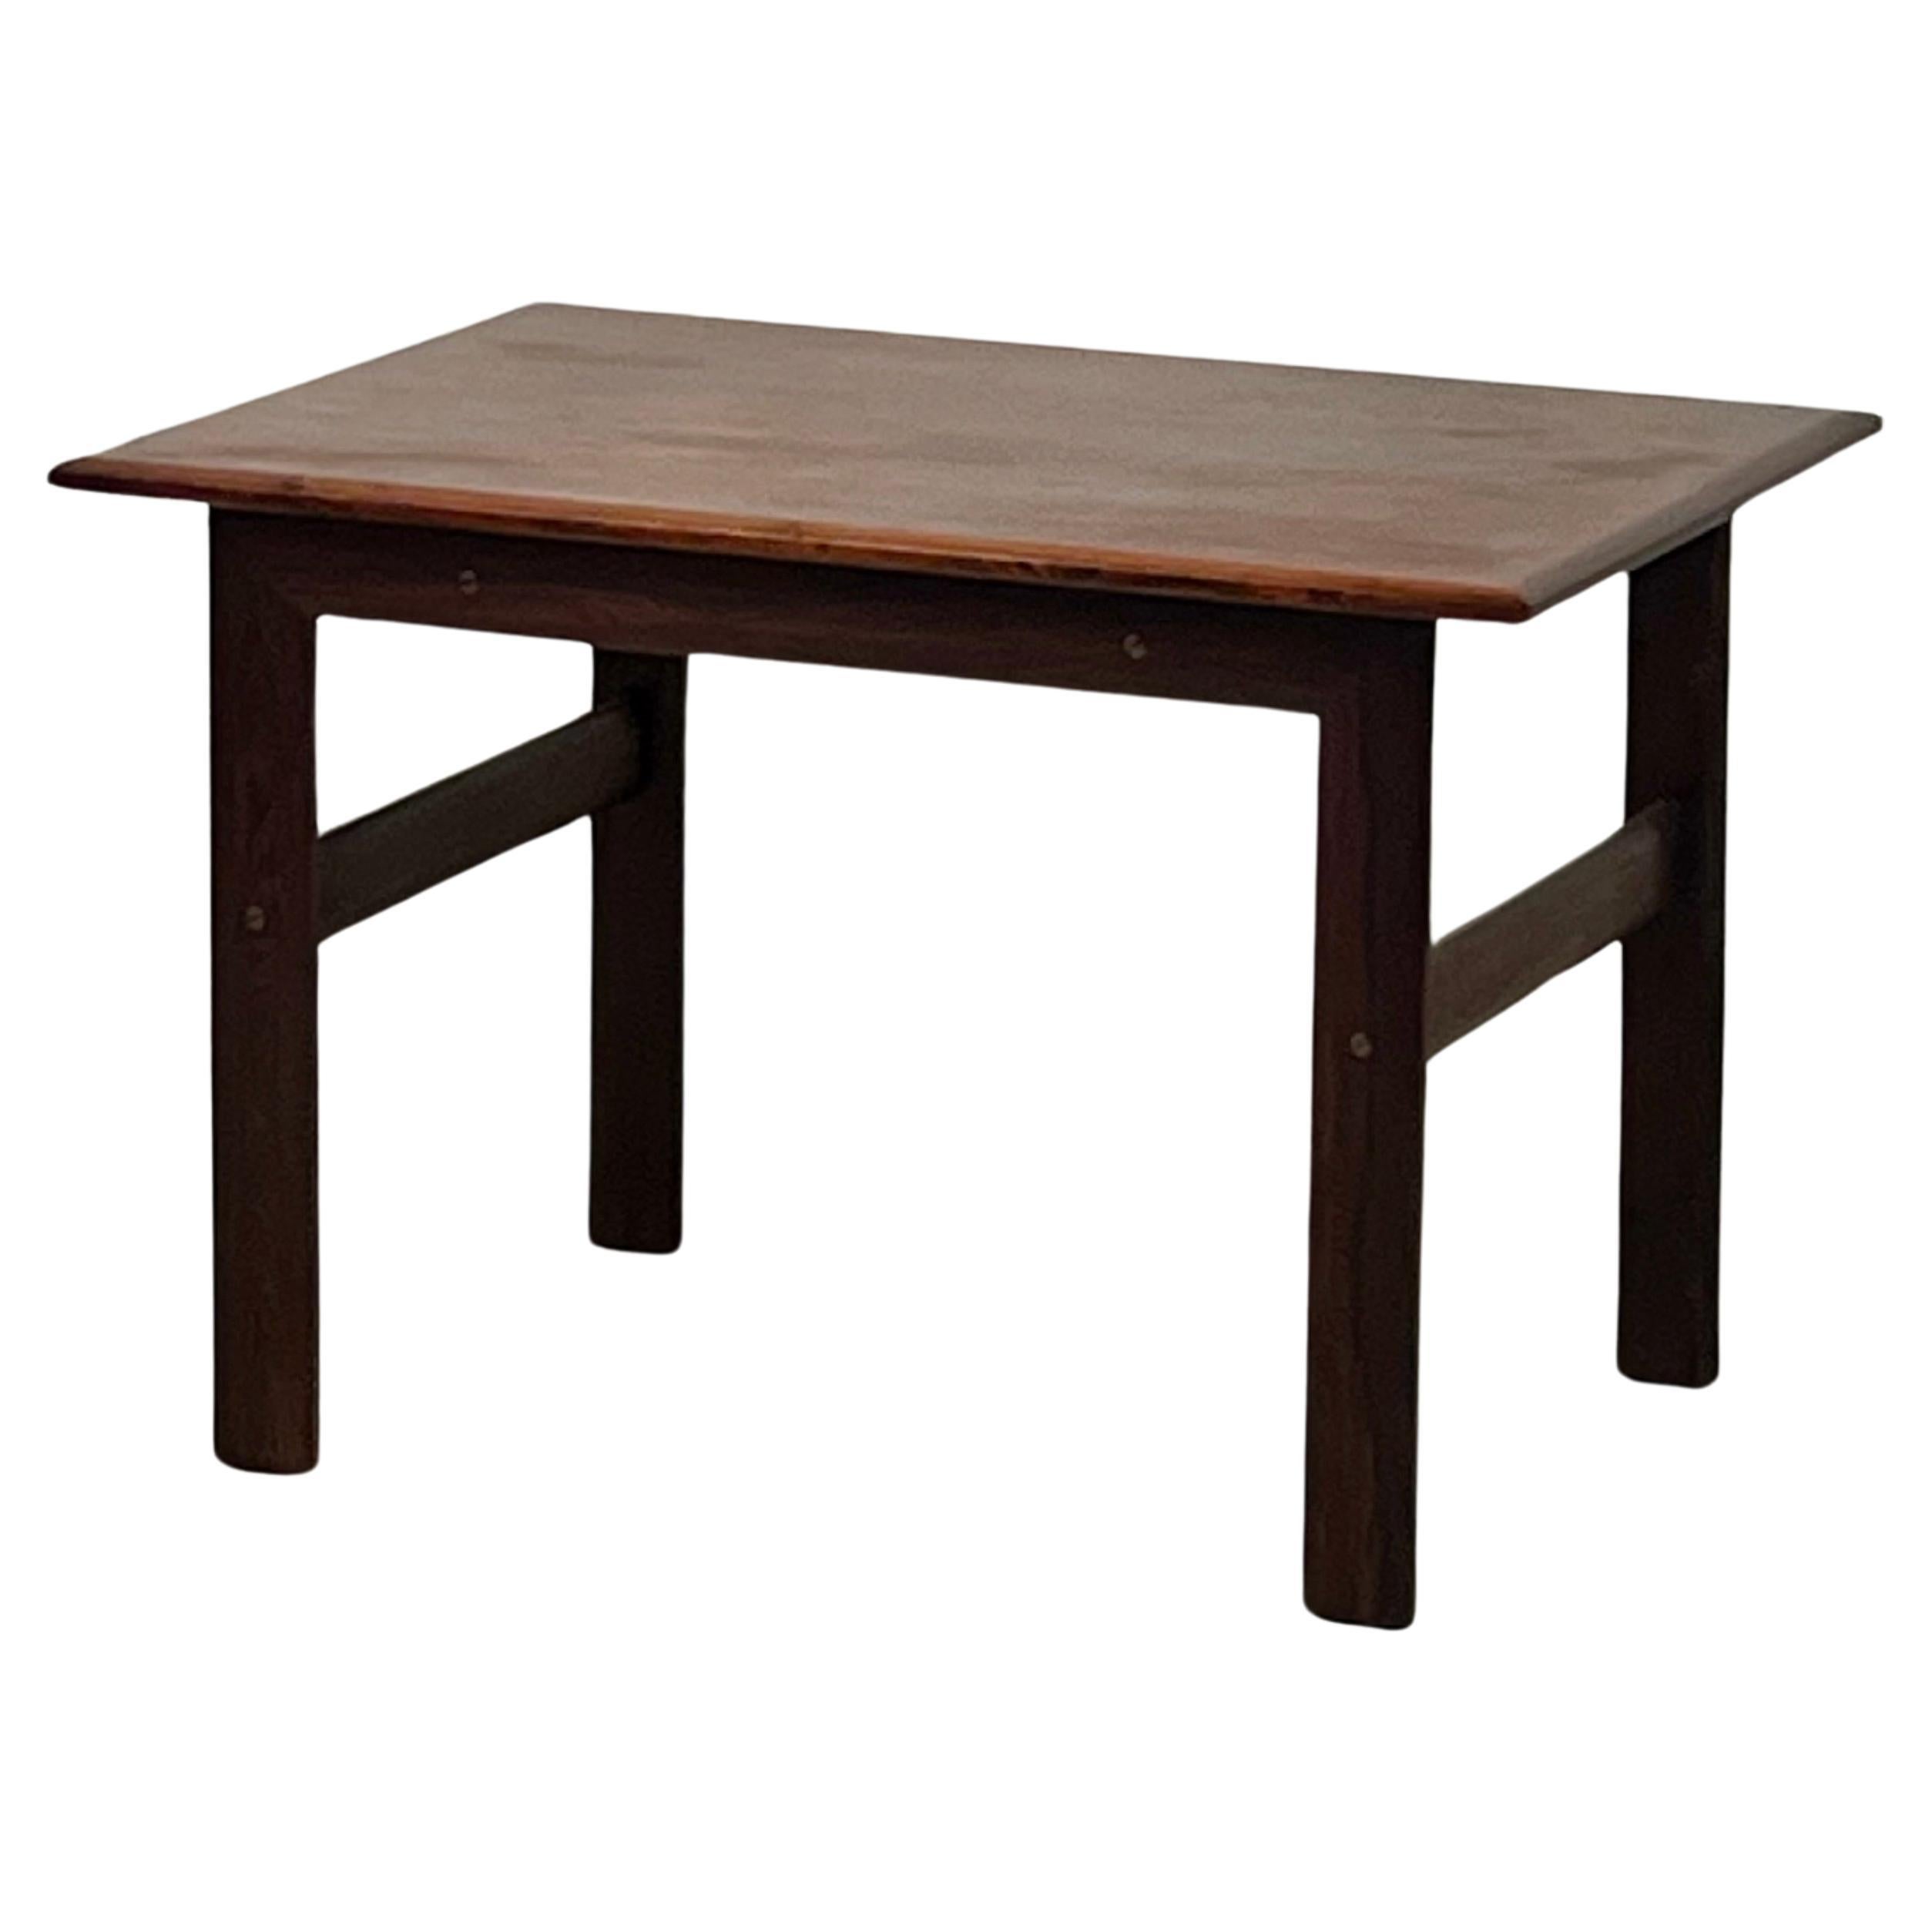 Chic Danish Midcentury Rosewood Side Table